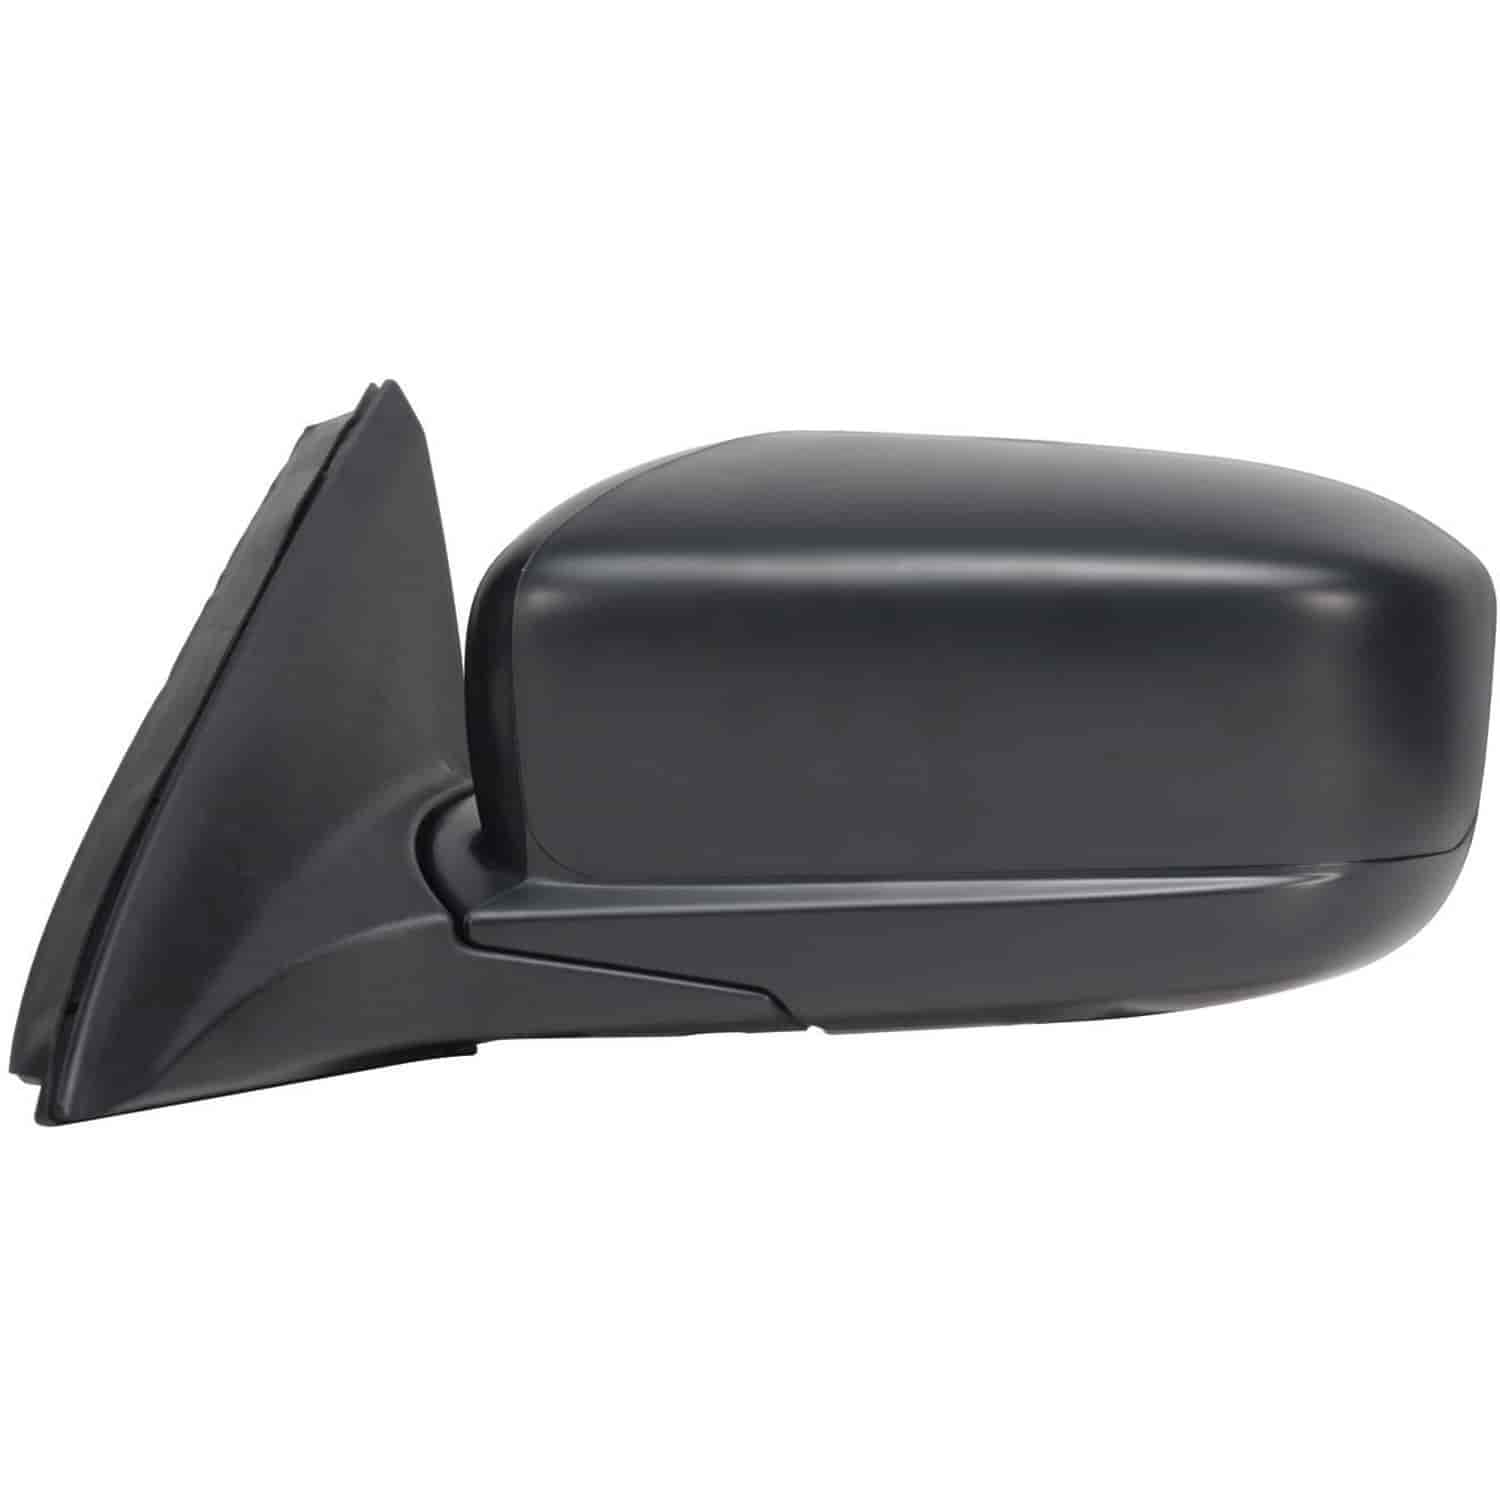 OEM Style Replacement mirror for 03-07 Honda Accord Sedan driver side mirror tested to fit and funct